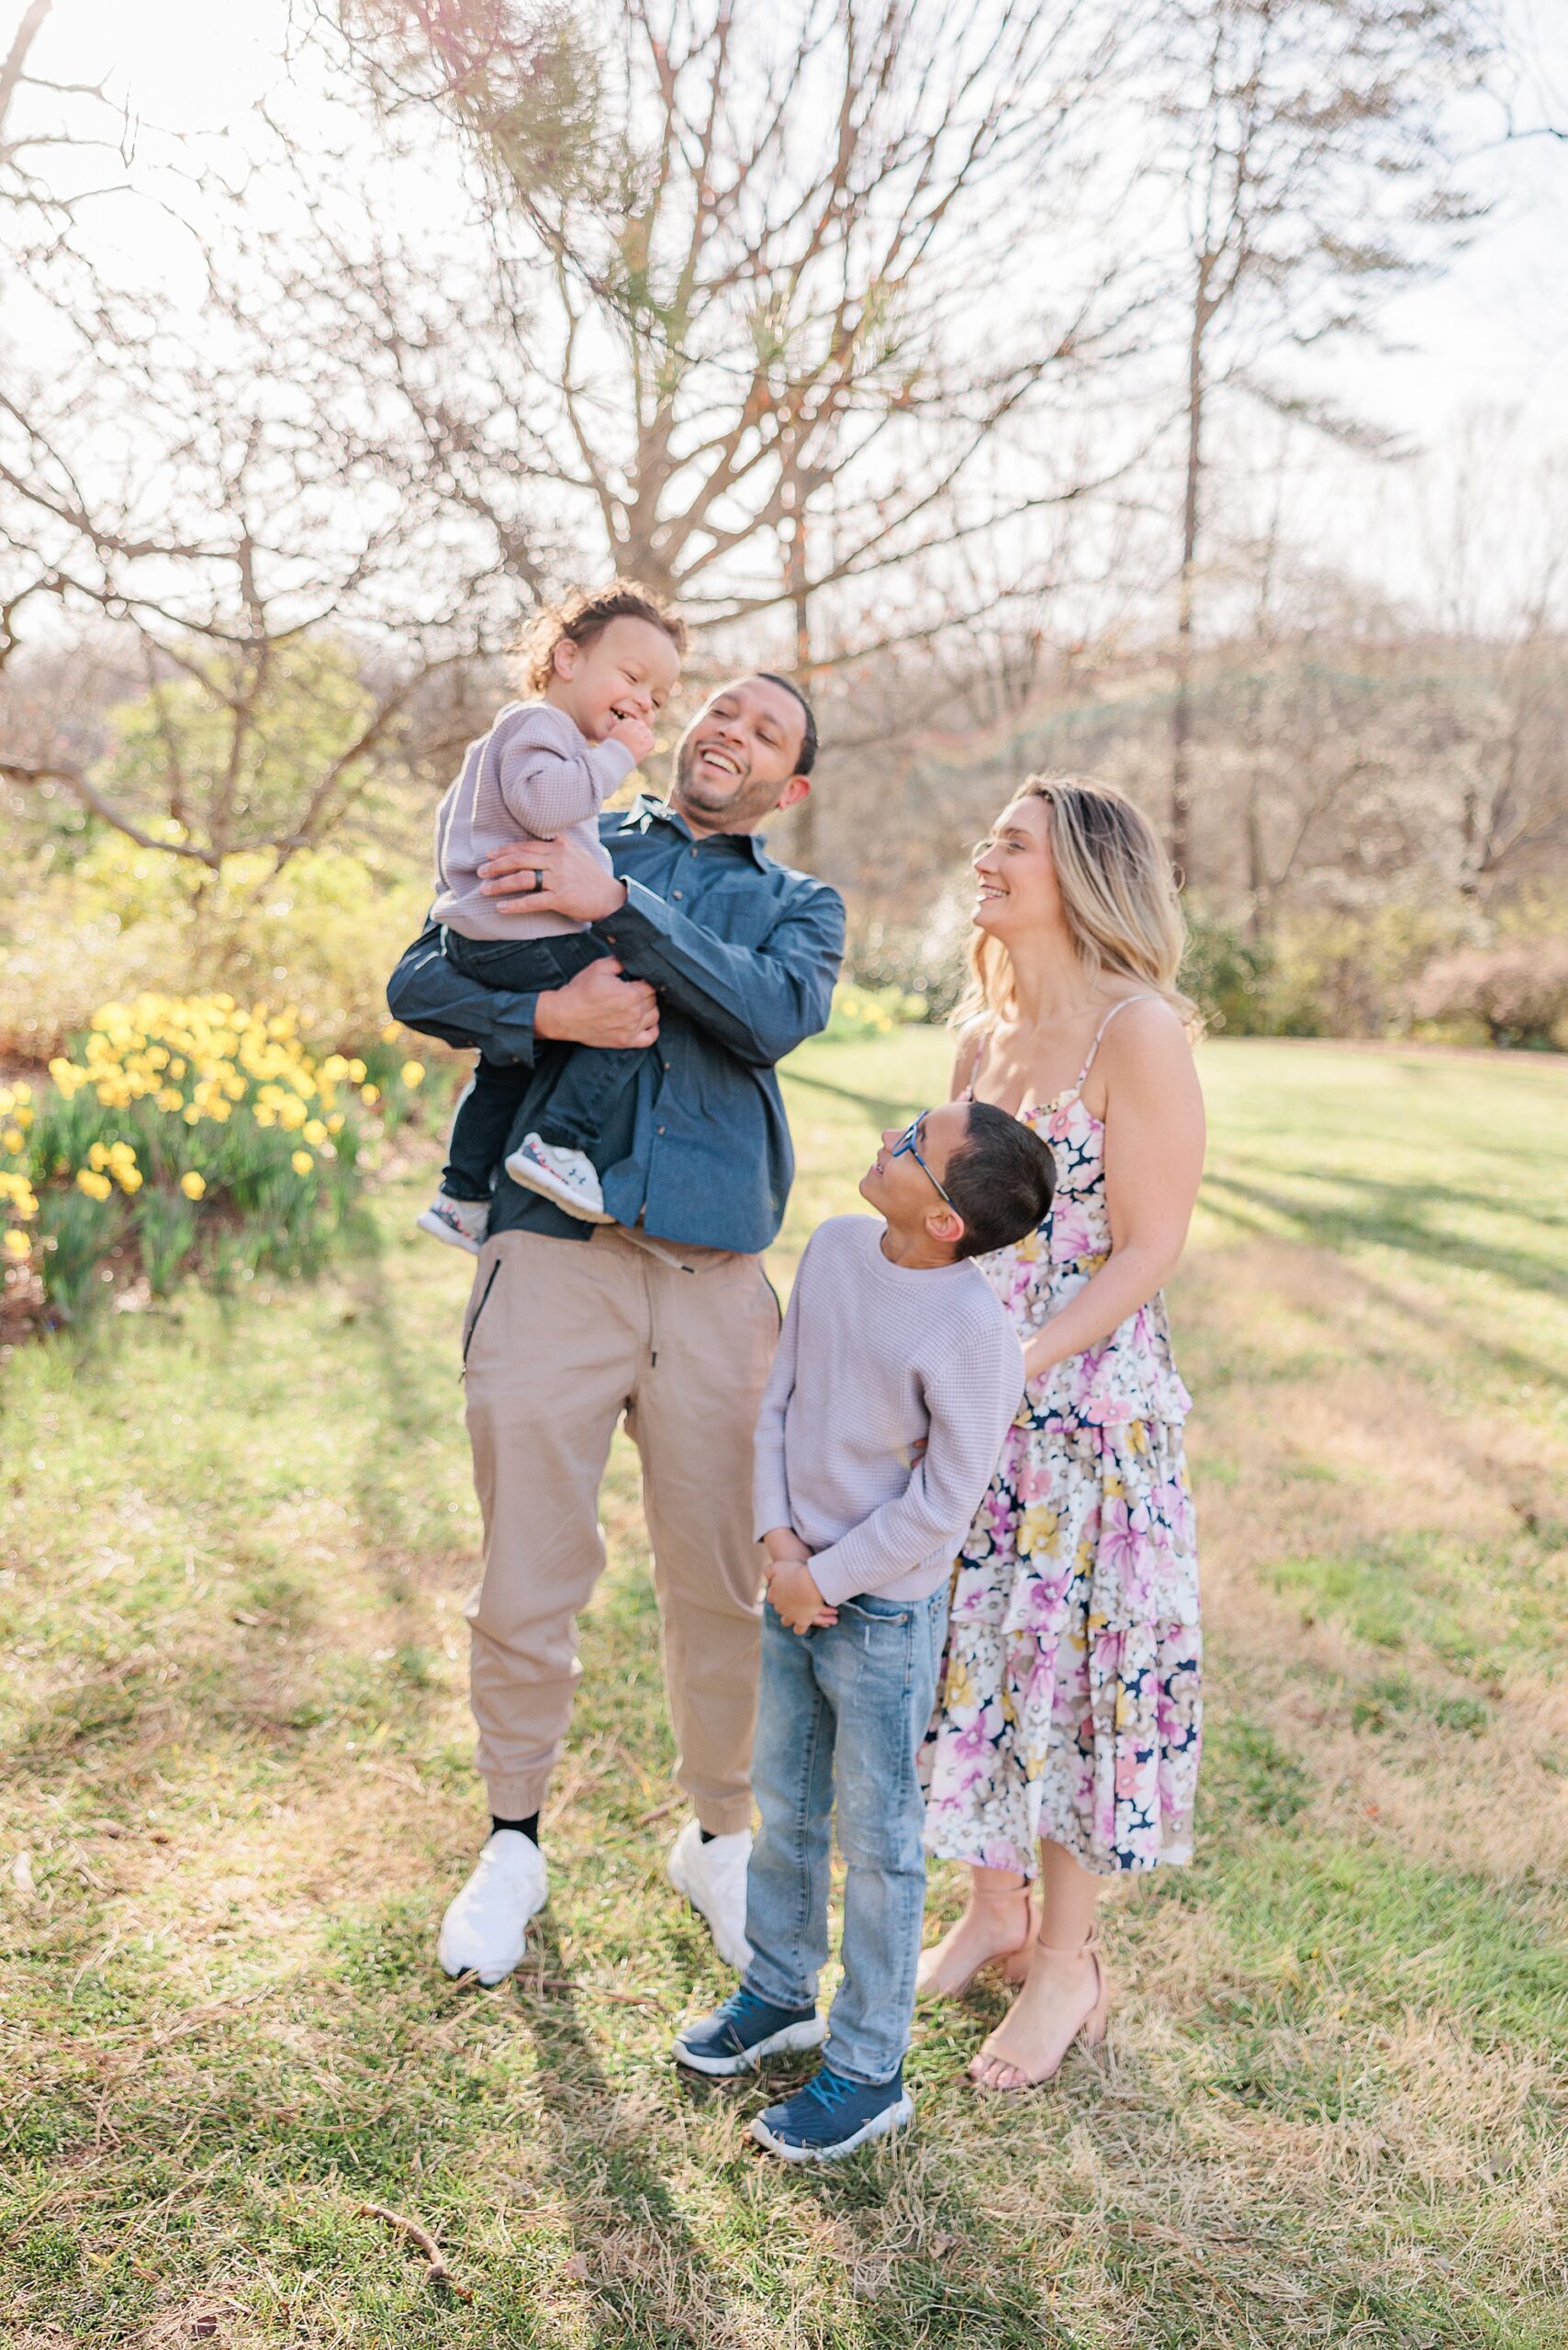 DMV family photographer shares why photography permits are important when planning your family photos - and what they mean! 